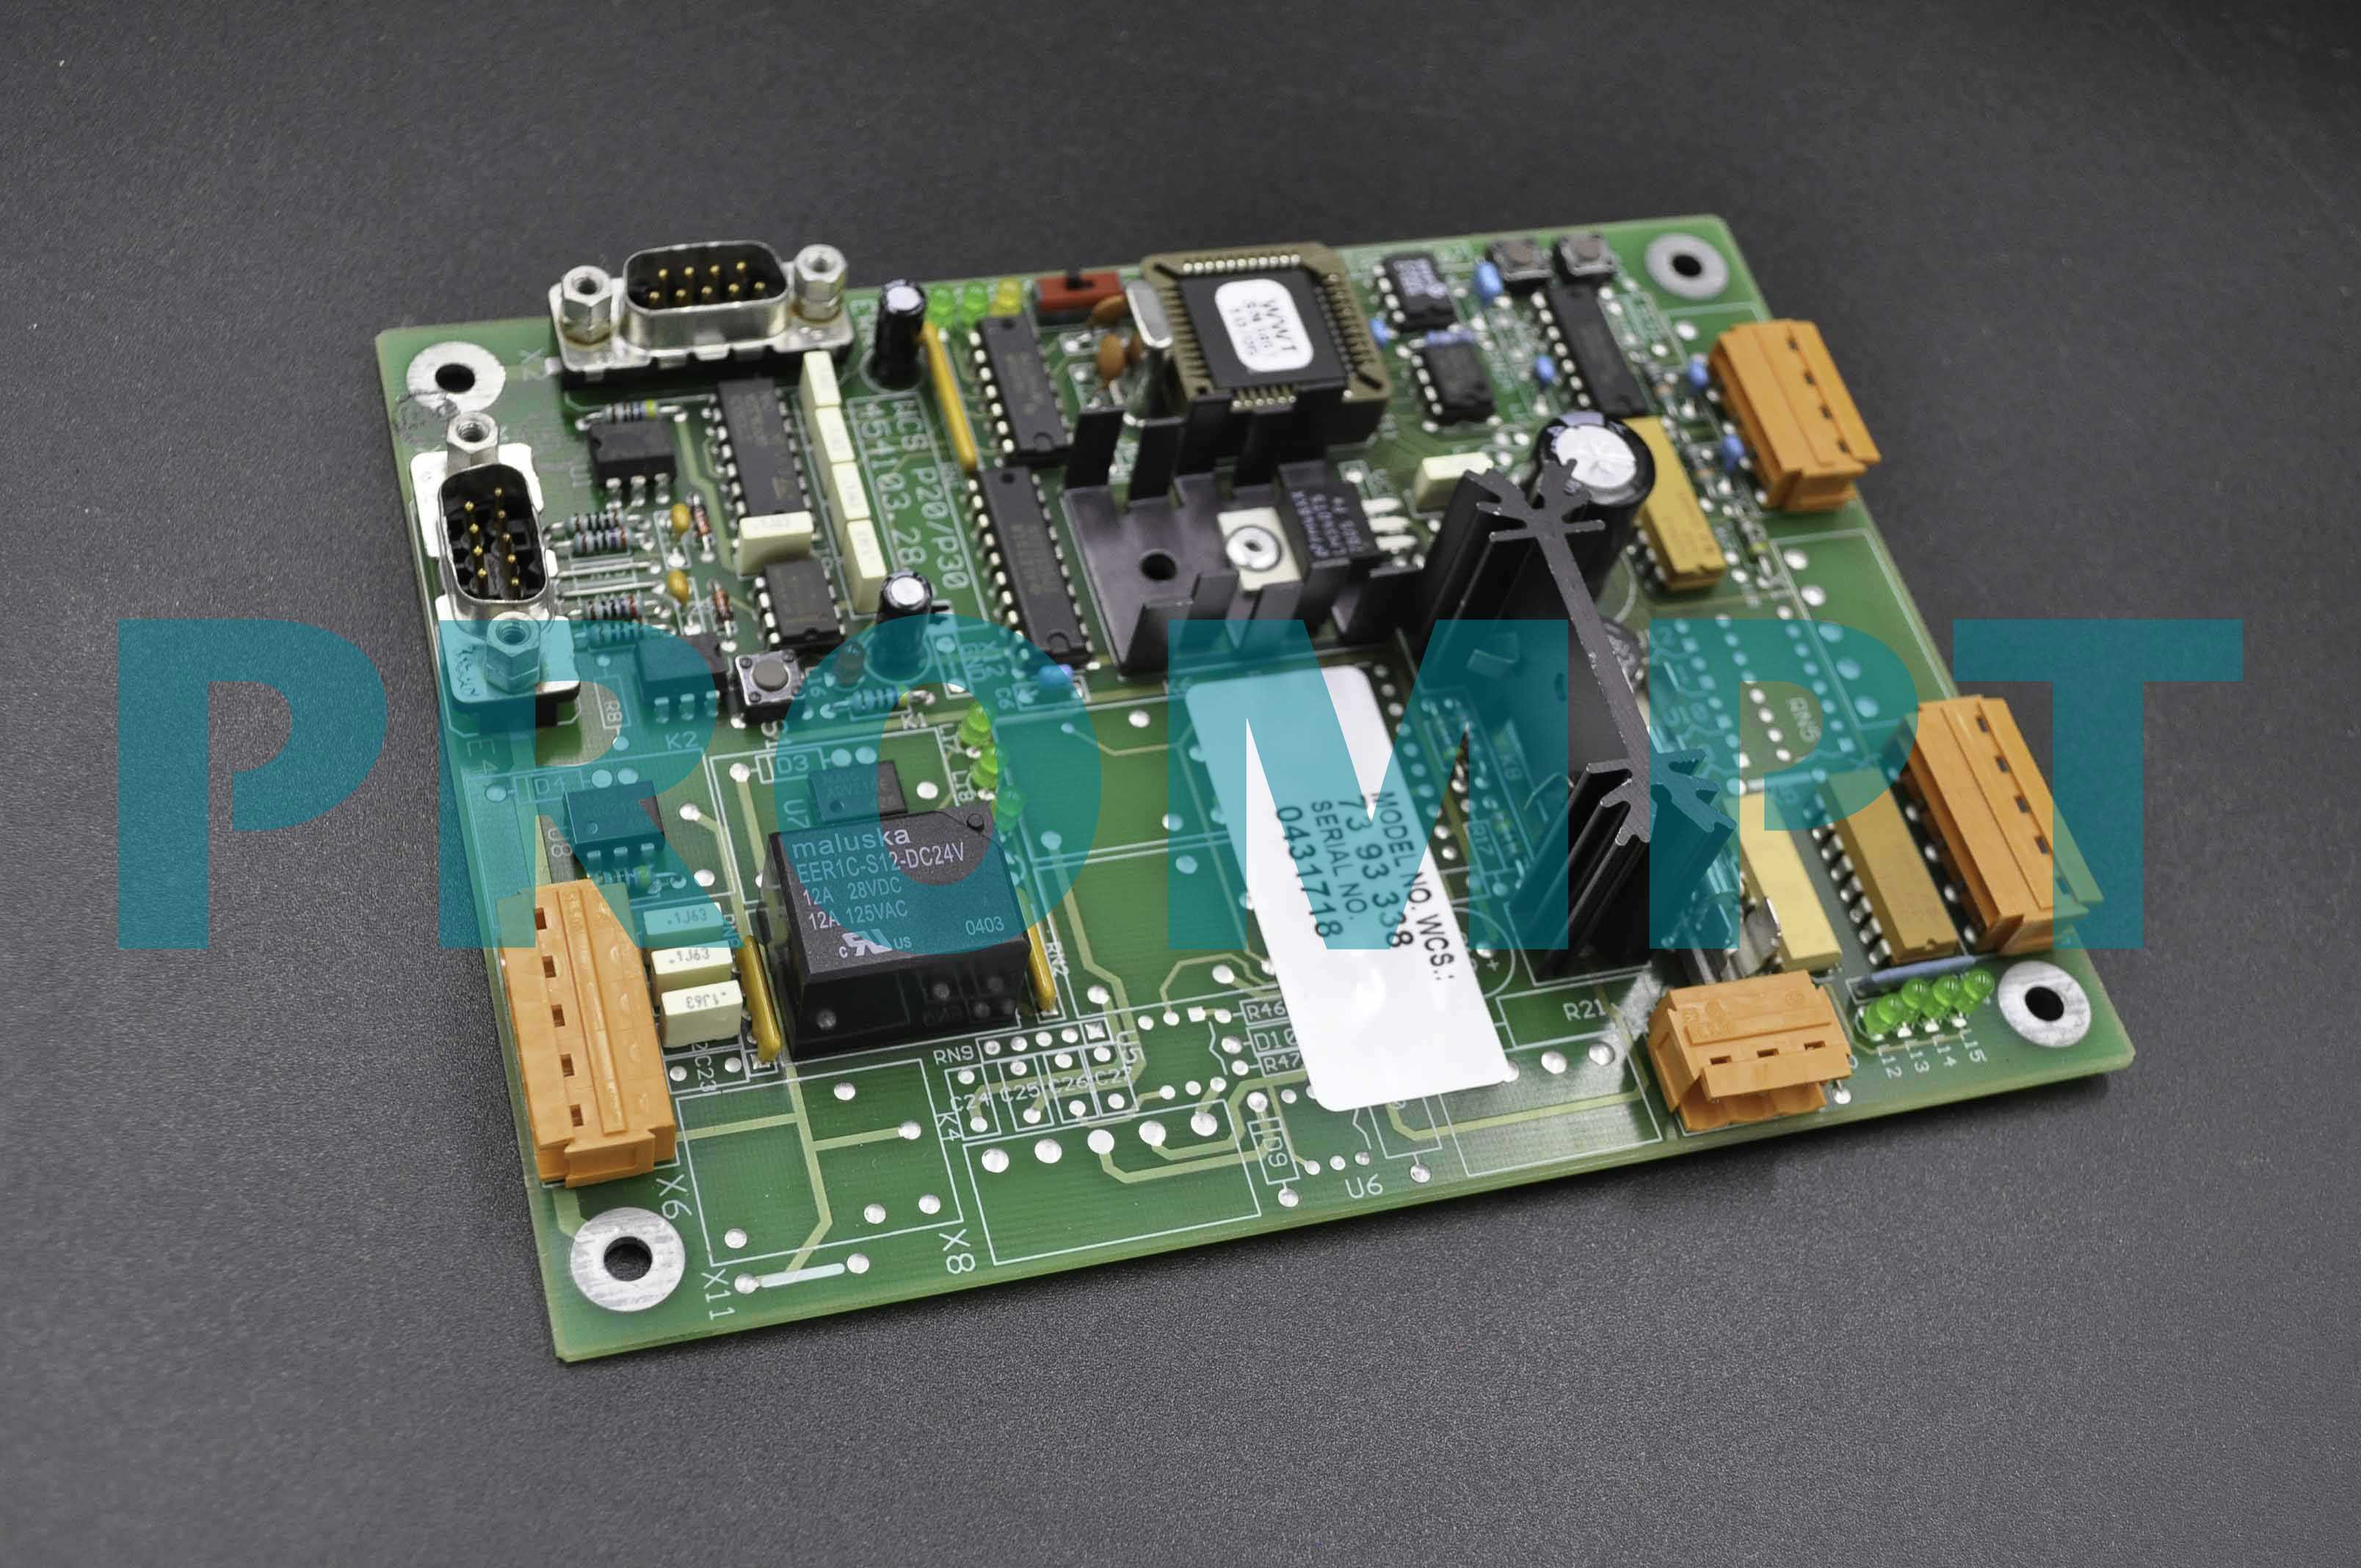 Control and regulation board

P20-30